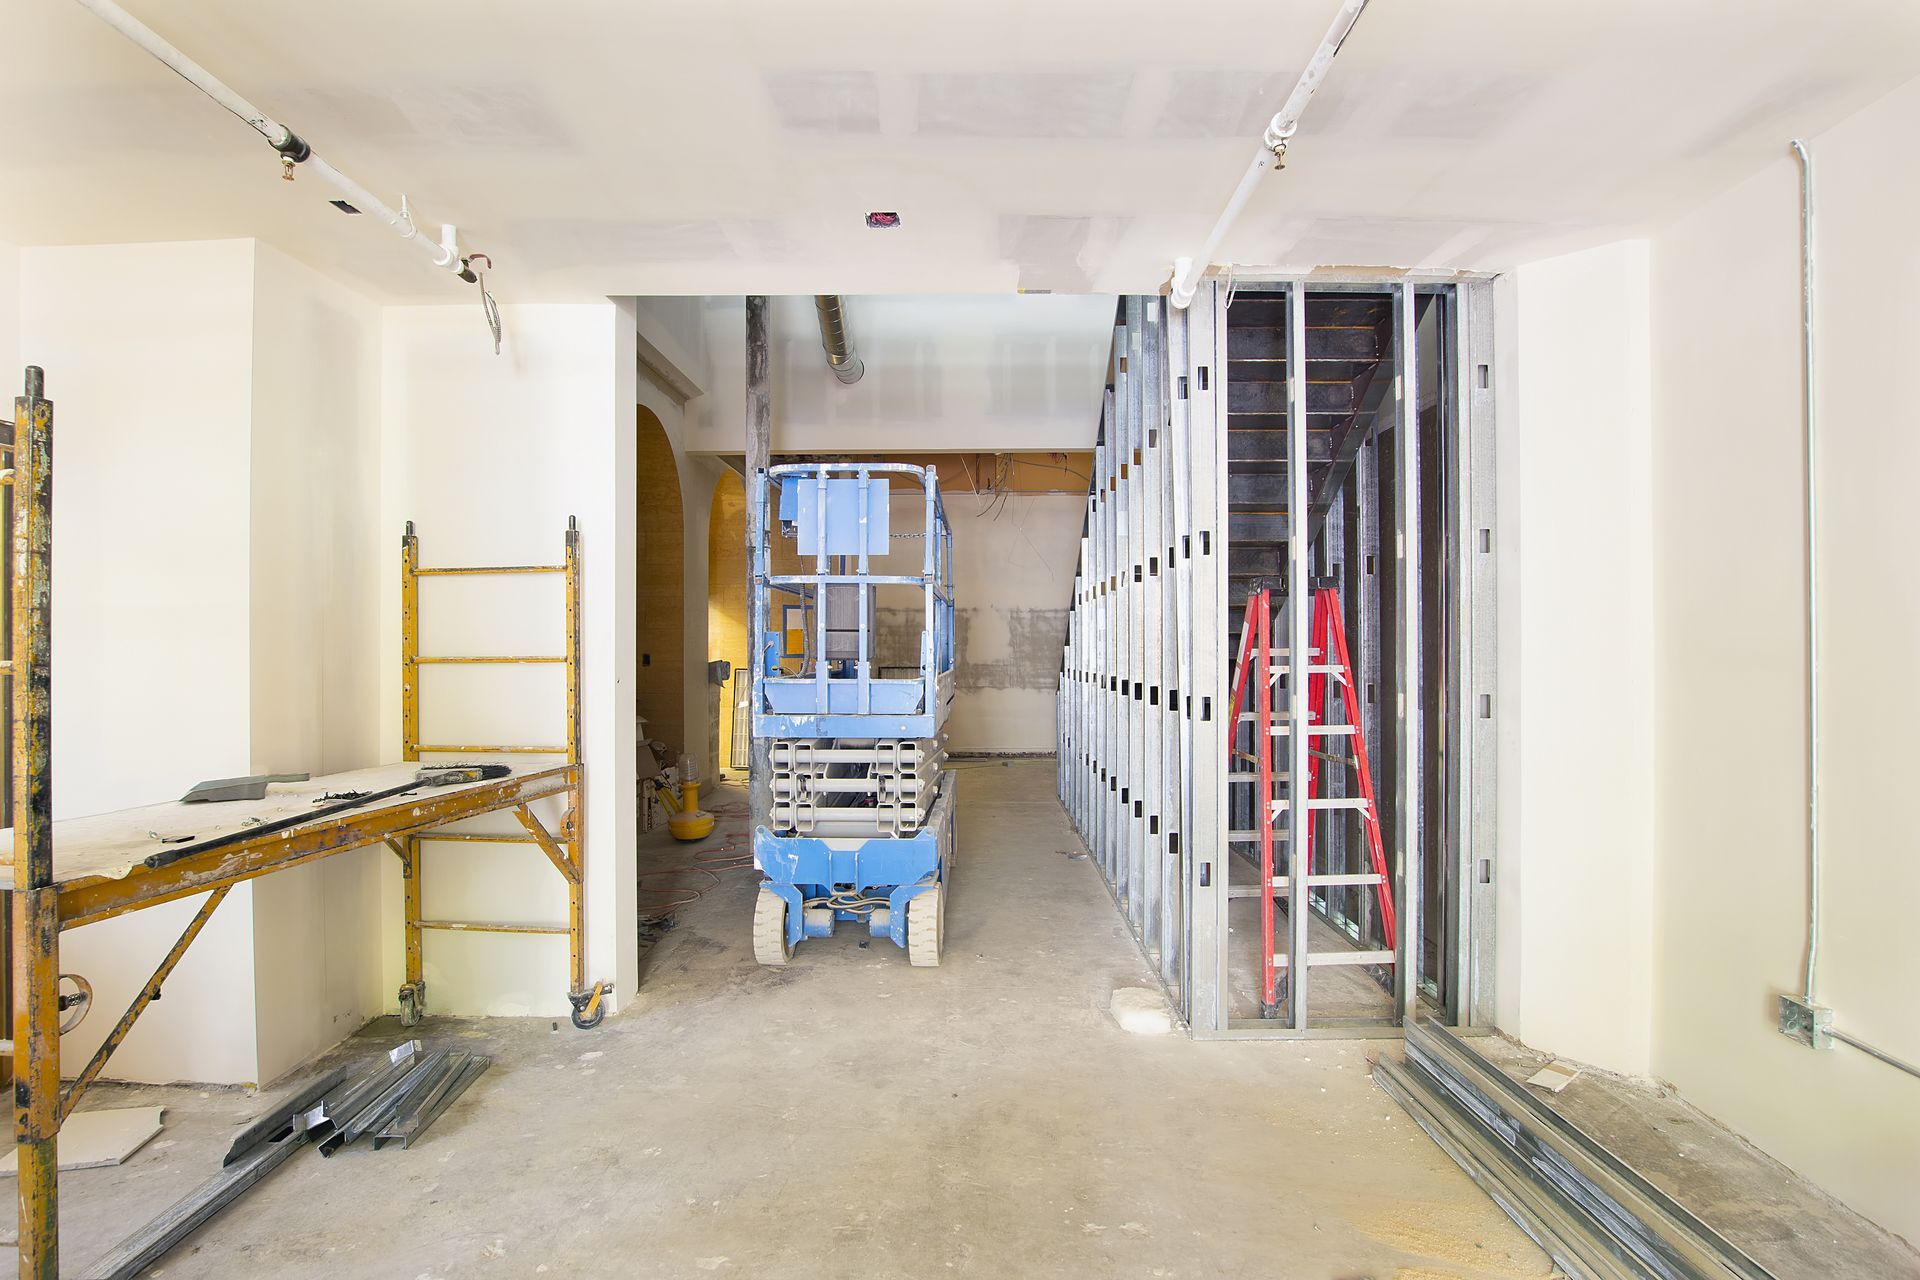 a blue scissor lift is parked in a room under construction .